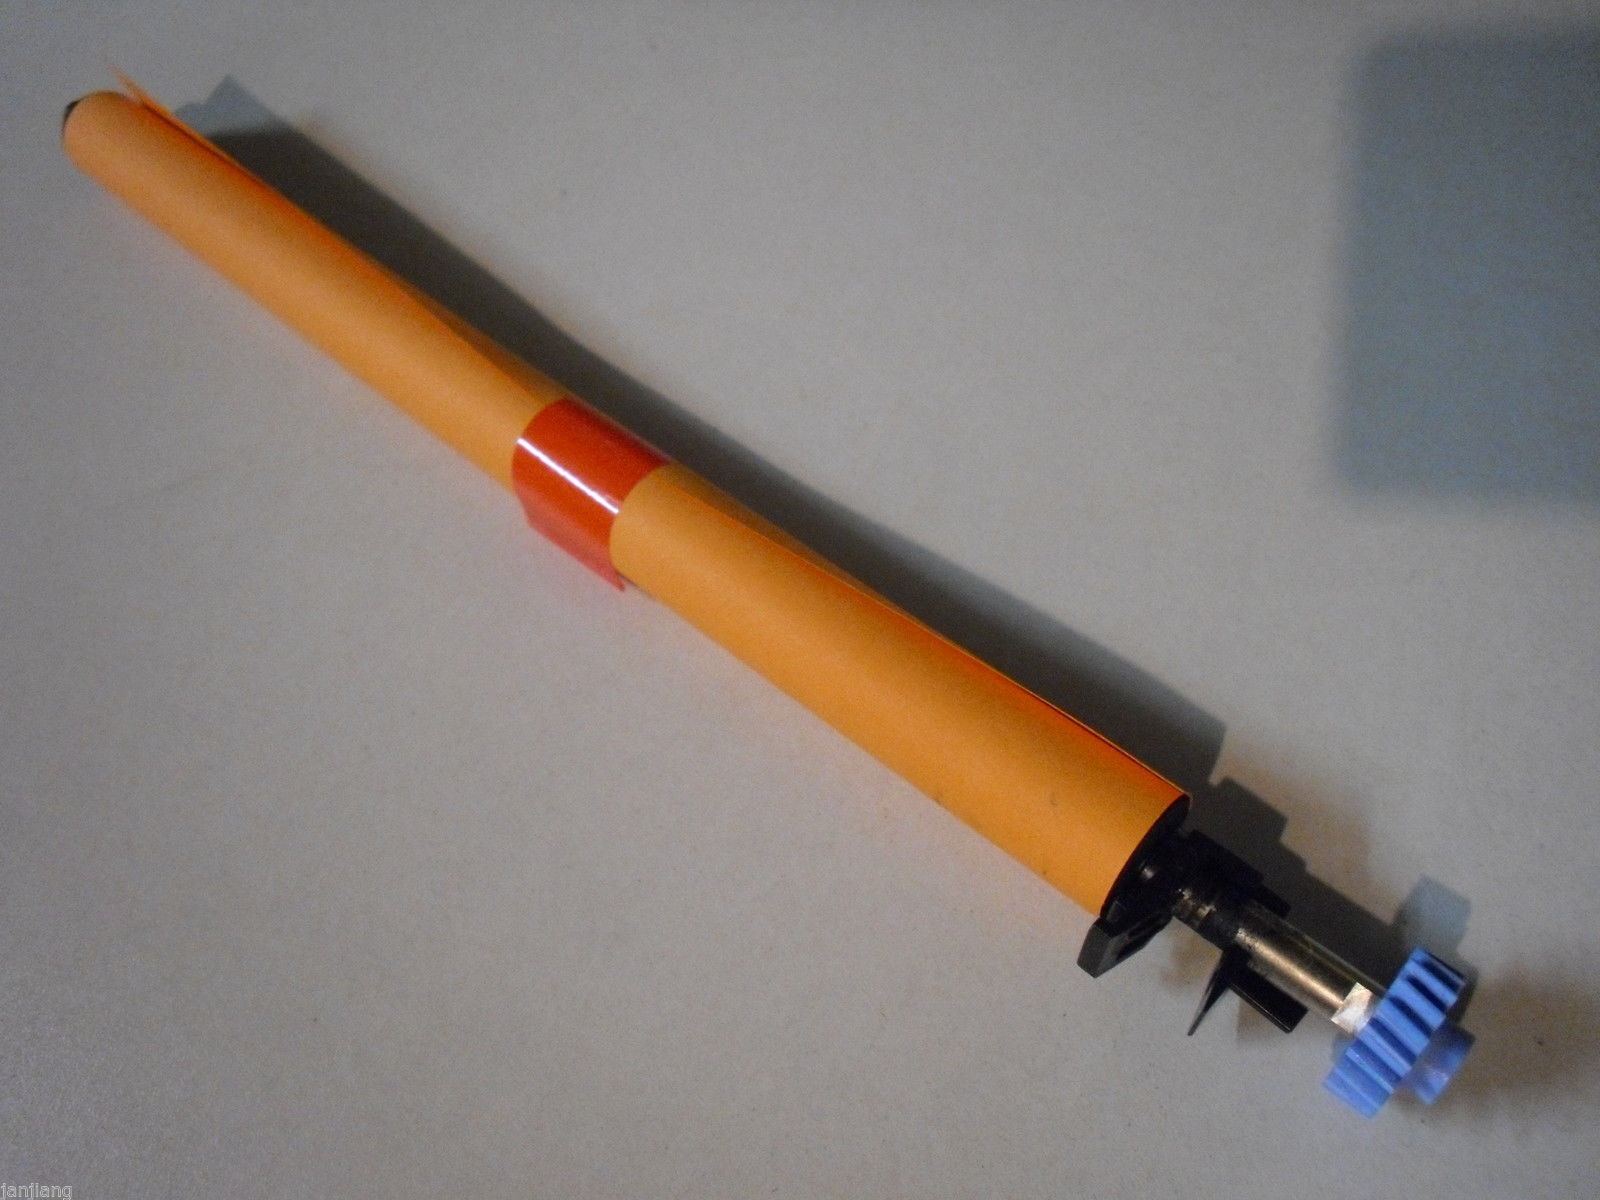 Transfer Roller Compatible for 4200 4240 4250 4300 Printer RM1-1110-000 